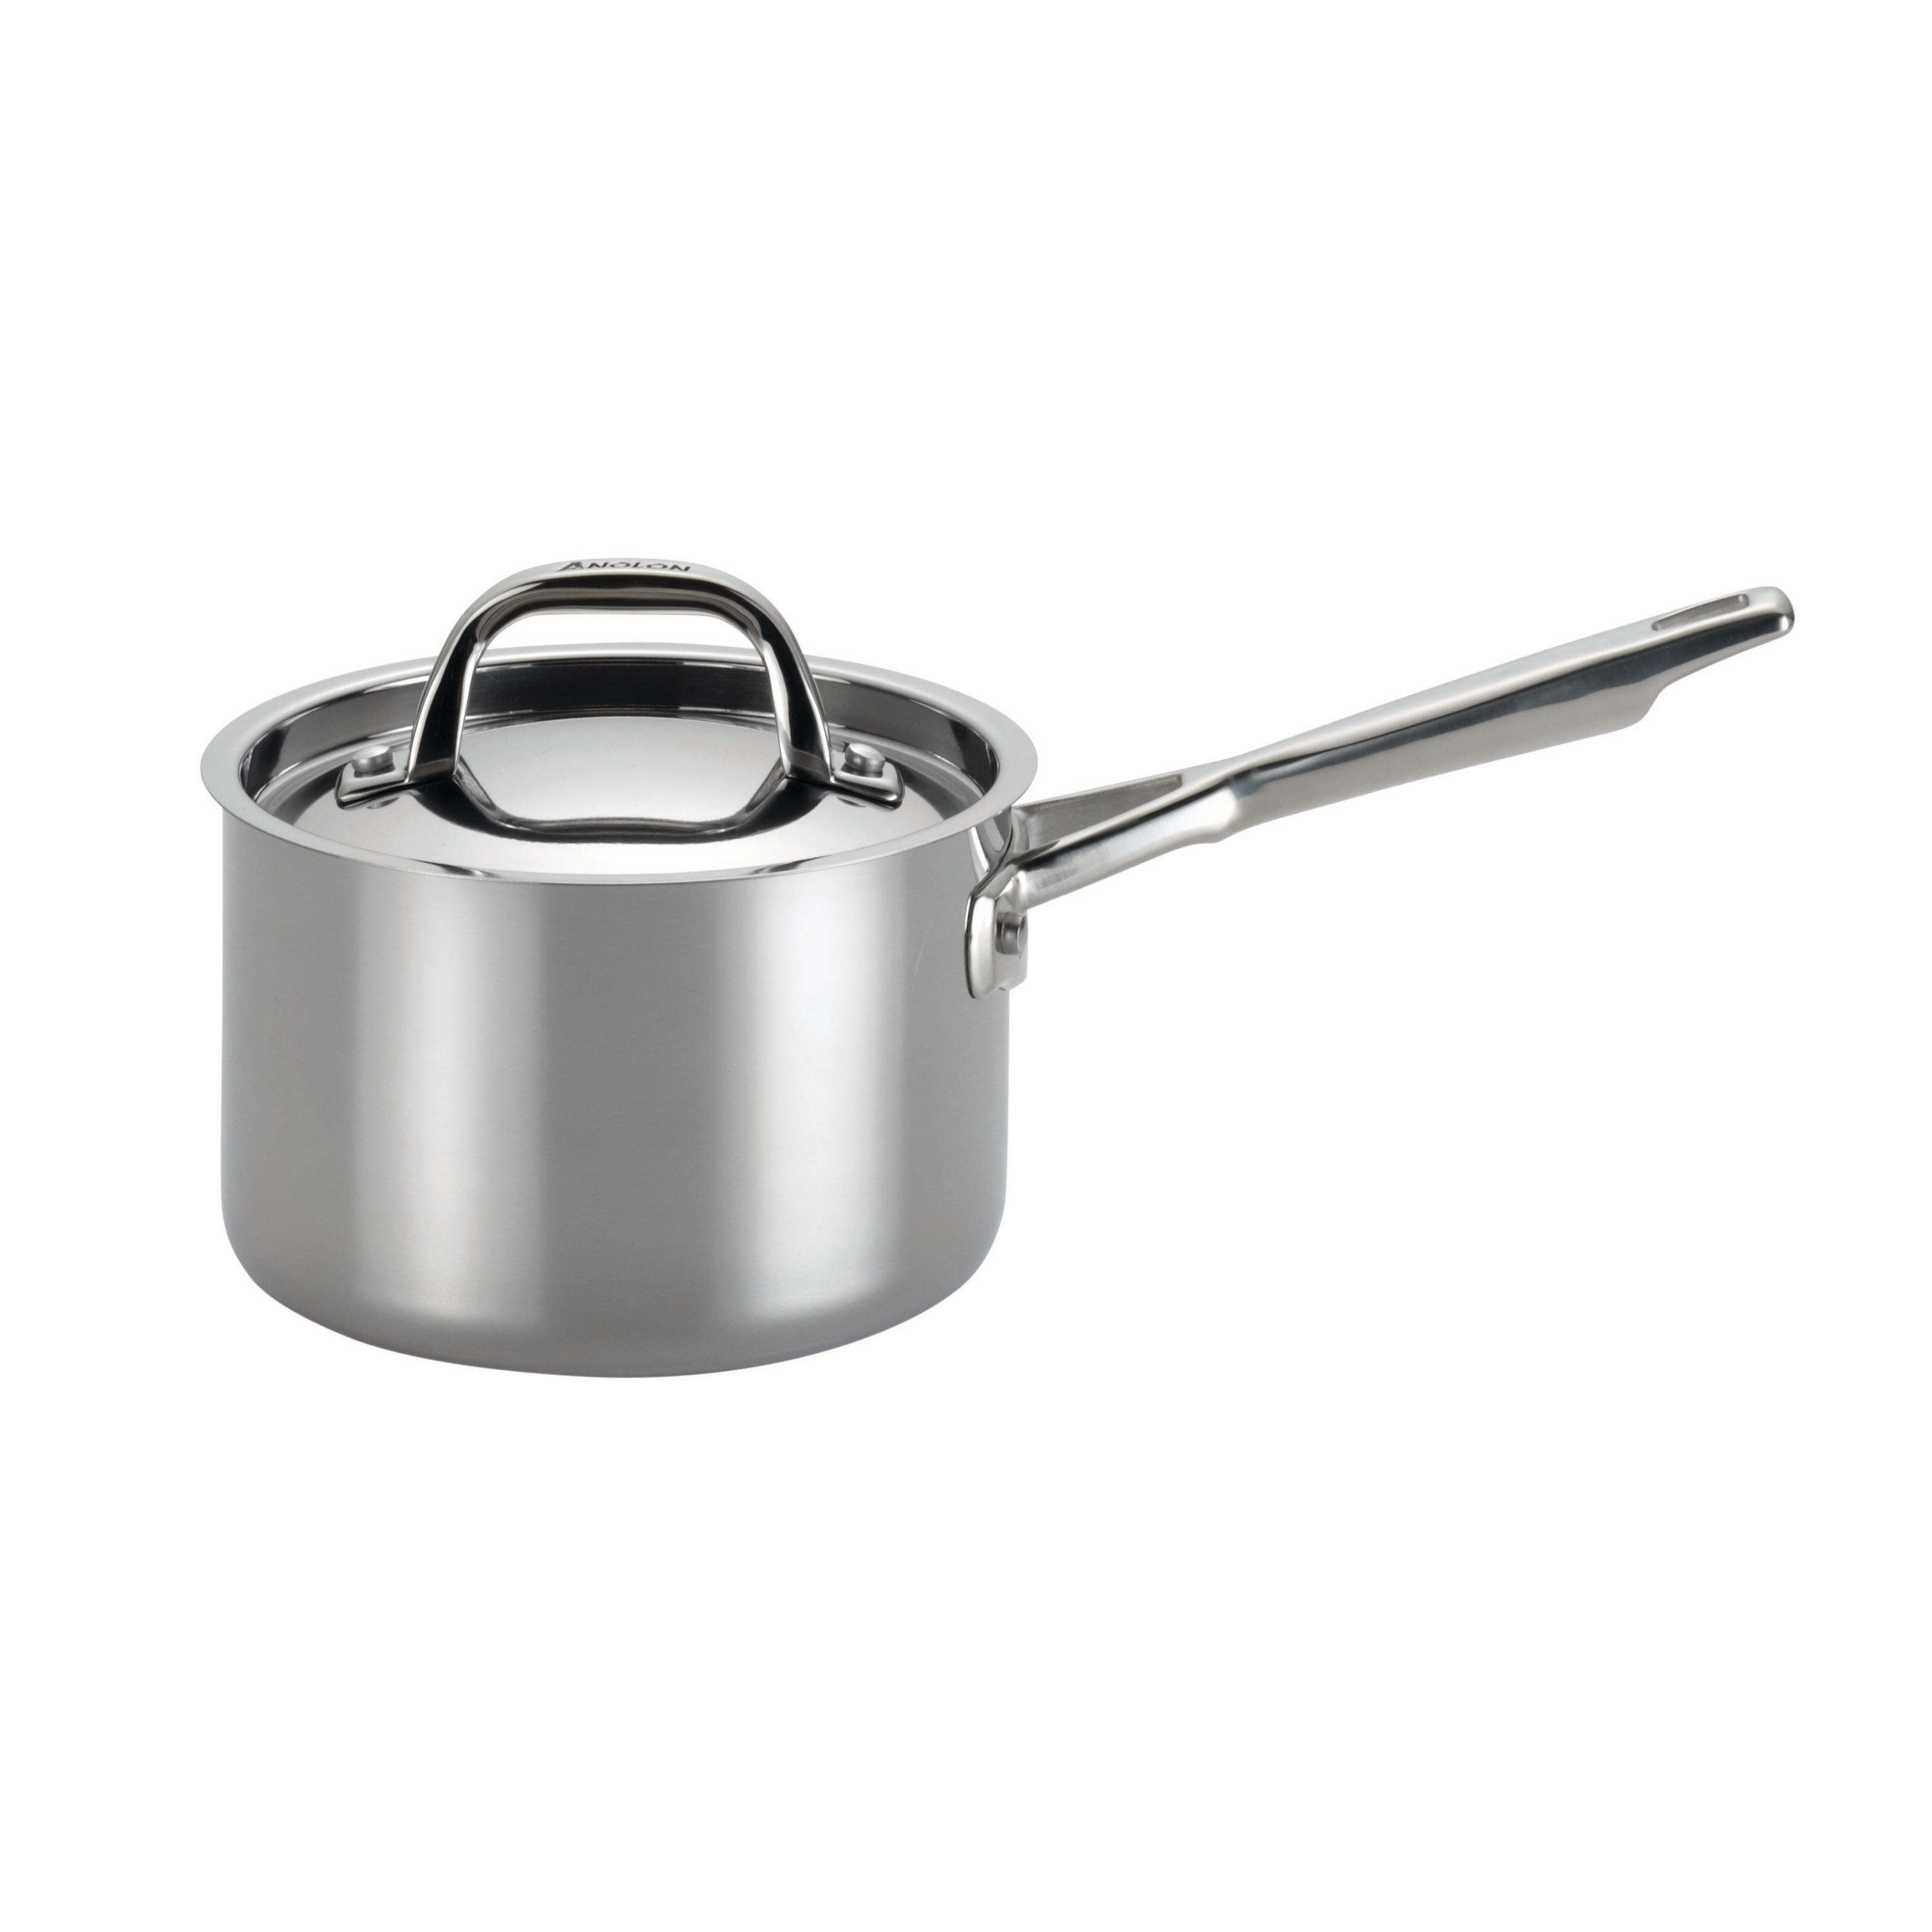 All-Clad Tri-Ply Stainless Steel 10 inch Frying Pan w/Lid (41106) 